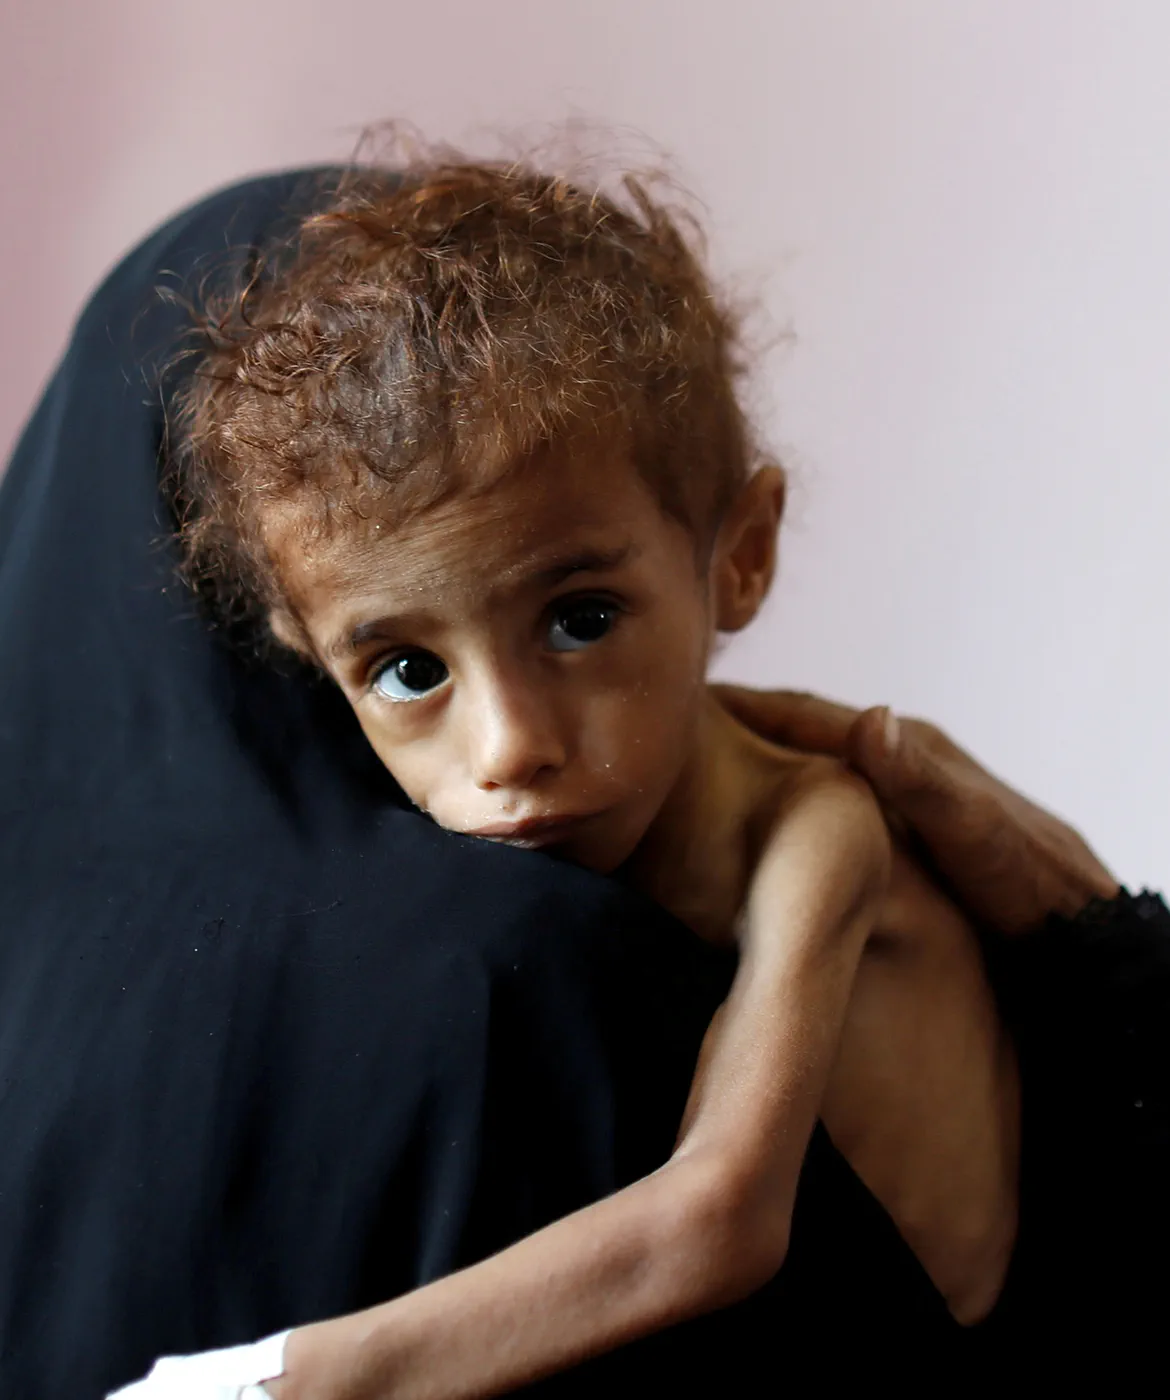 Young child in Yemen being held by mother